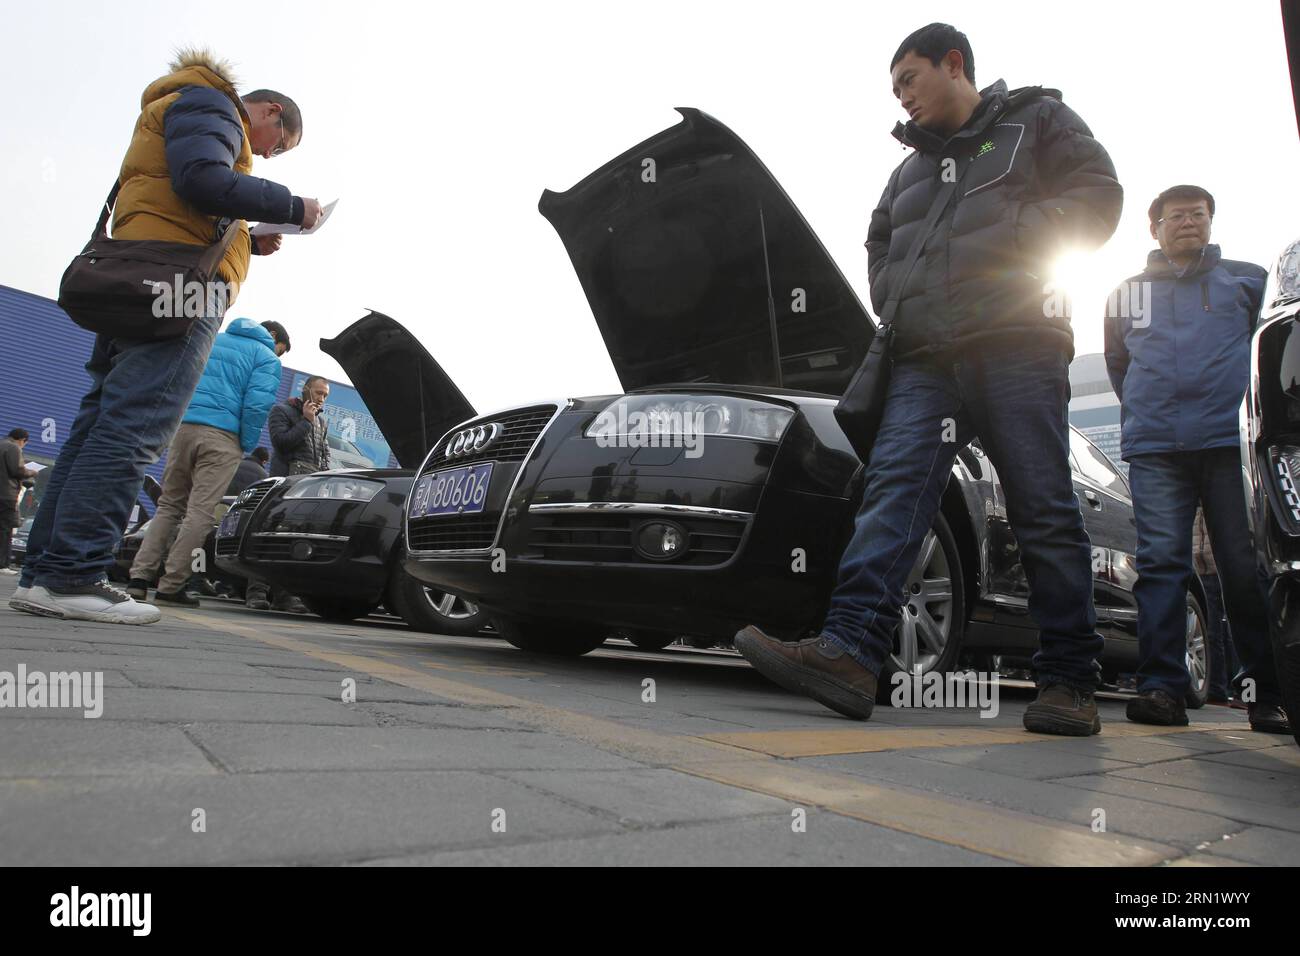 (150123) -- BEIJING, Jan. 23, 2015 -- People view the cars to be auctioned at the Yayuncun Automobile Trader Market in Beijing, capital of China, Jan. 23, 2015. The central government has impounded 3,184 official vehicles and plans to auction the first 300 before the Spring Festival, said the National Government Offices Administration (NGOA) on Jan. 16. ) (wyo) CHINA-BEIJING-GOVERNMENT CARS-AUCTION (CN) XingxGuangli PUBLICATIONxNOTxINxCHN   Beijing Jan 23 2015 Celebrities View The Cars to Be auctioned AT The  Automobiles Trader Market in Beijing Capital of China Jan 23 2015 The Central Governm Stock Photo